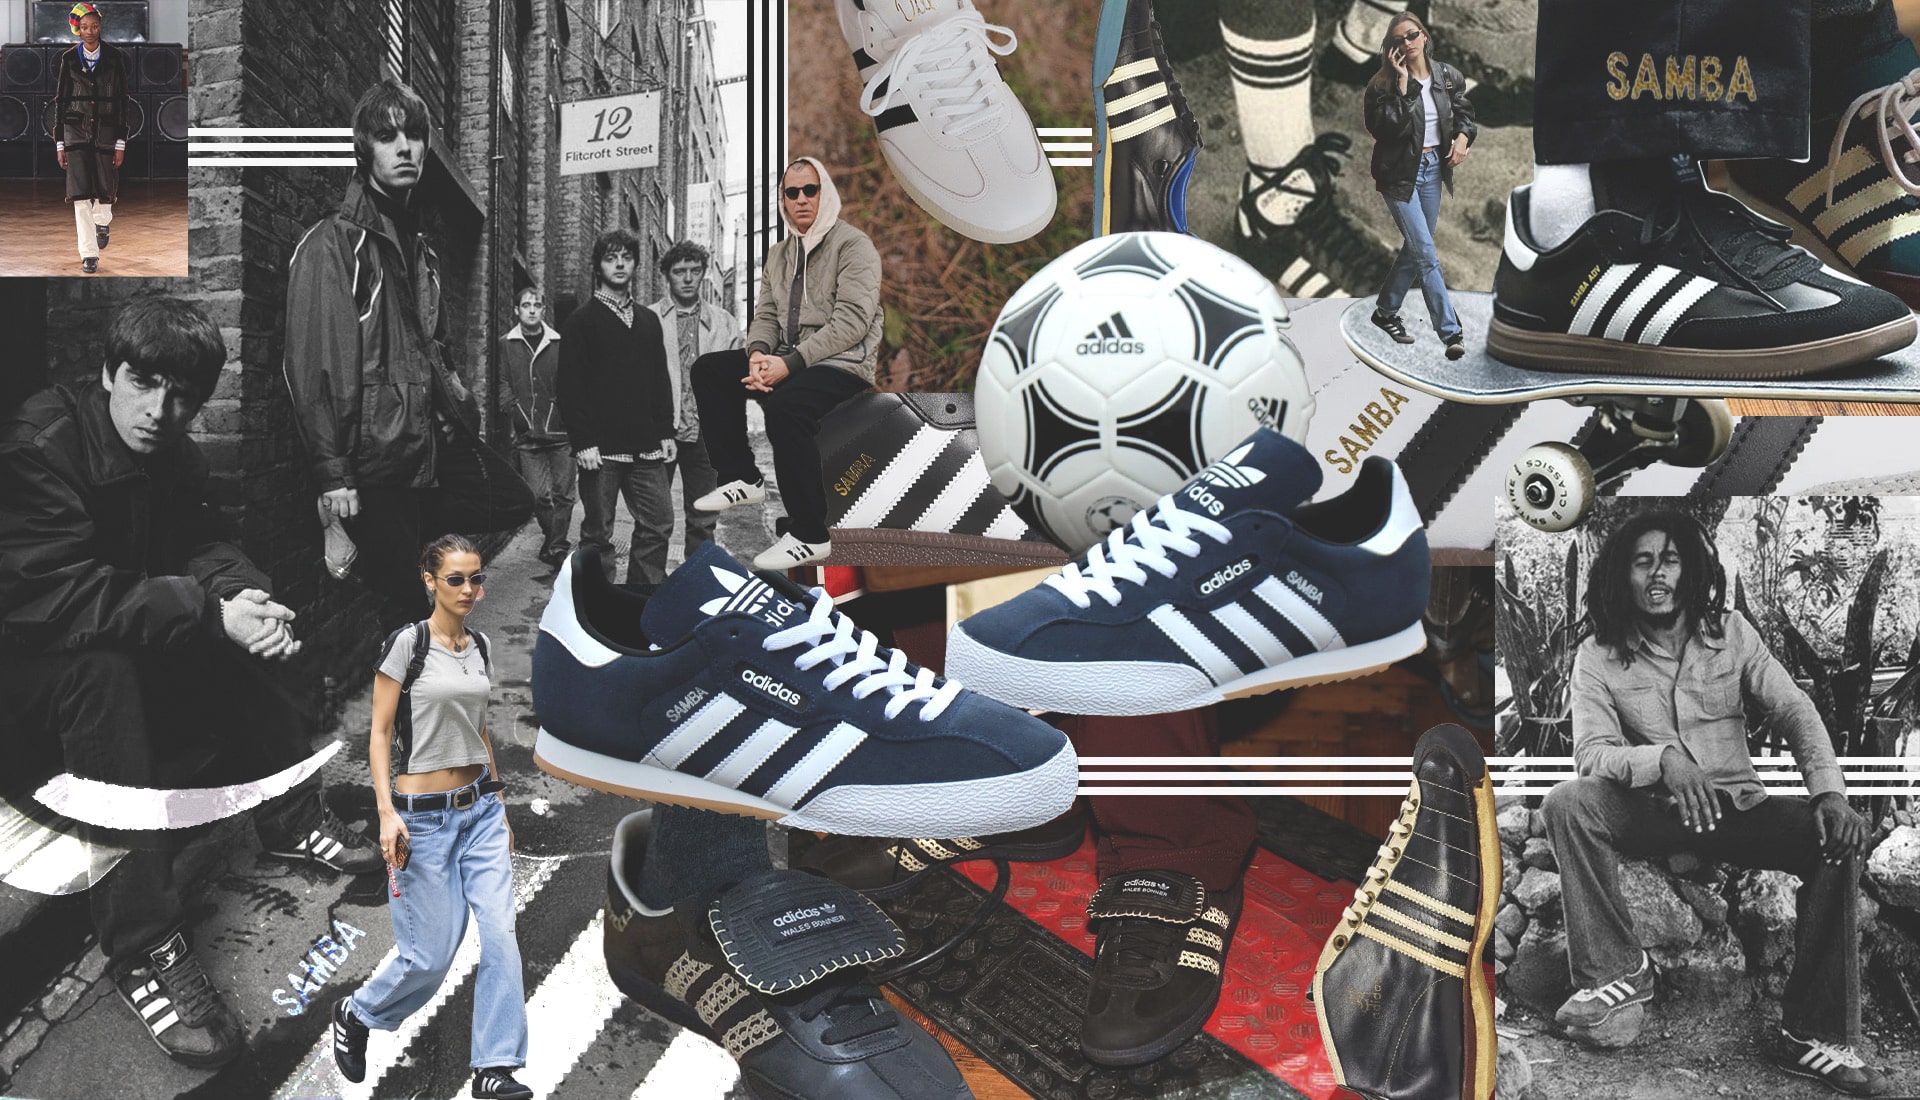 SoccerBible  The New Soccer Culture - SoccerBible